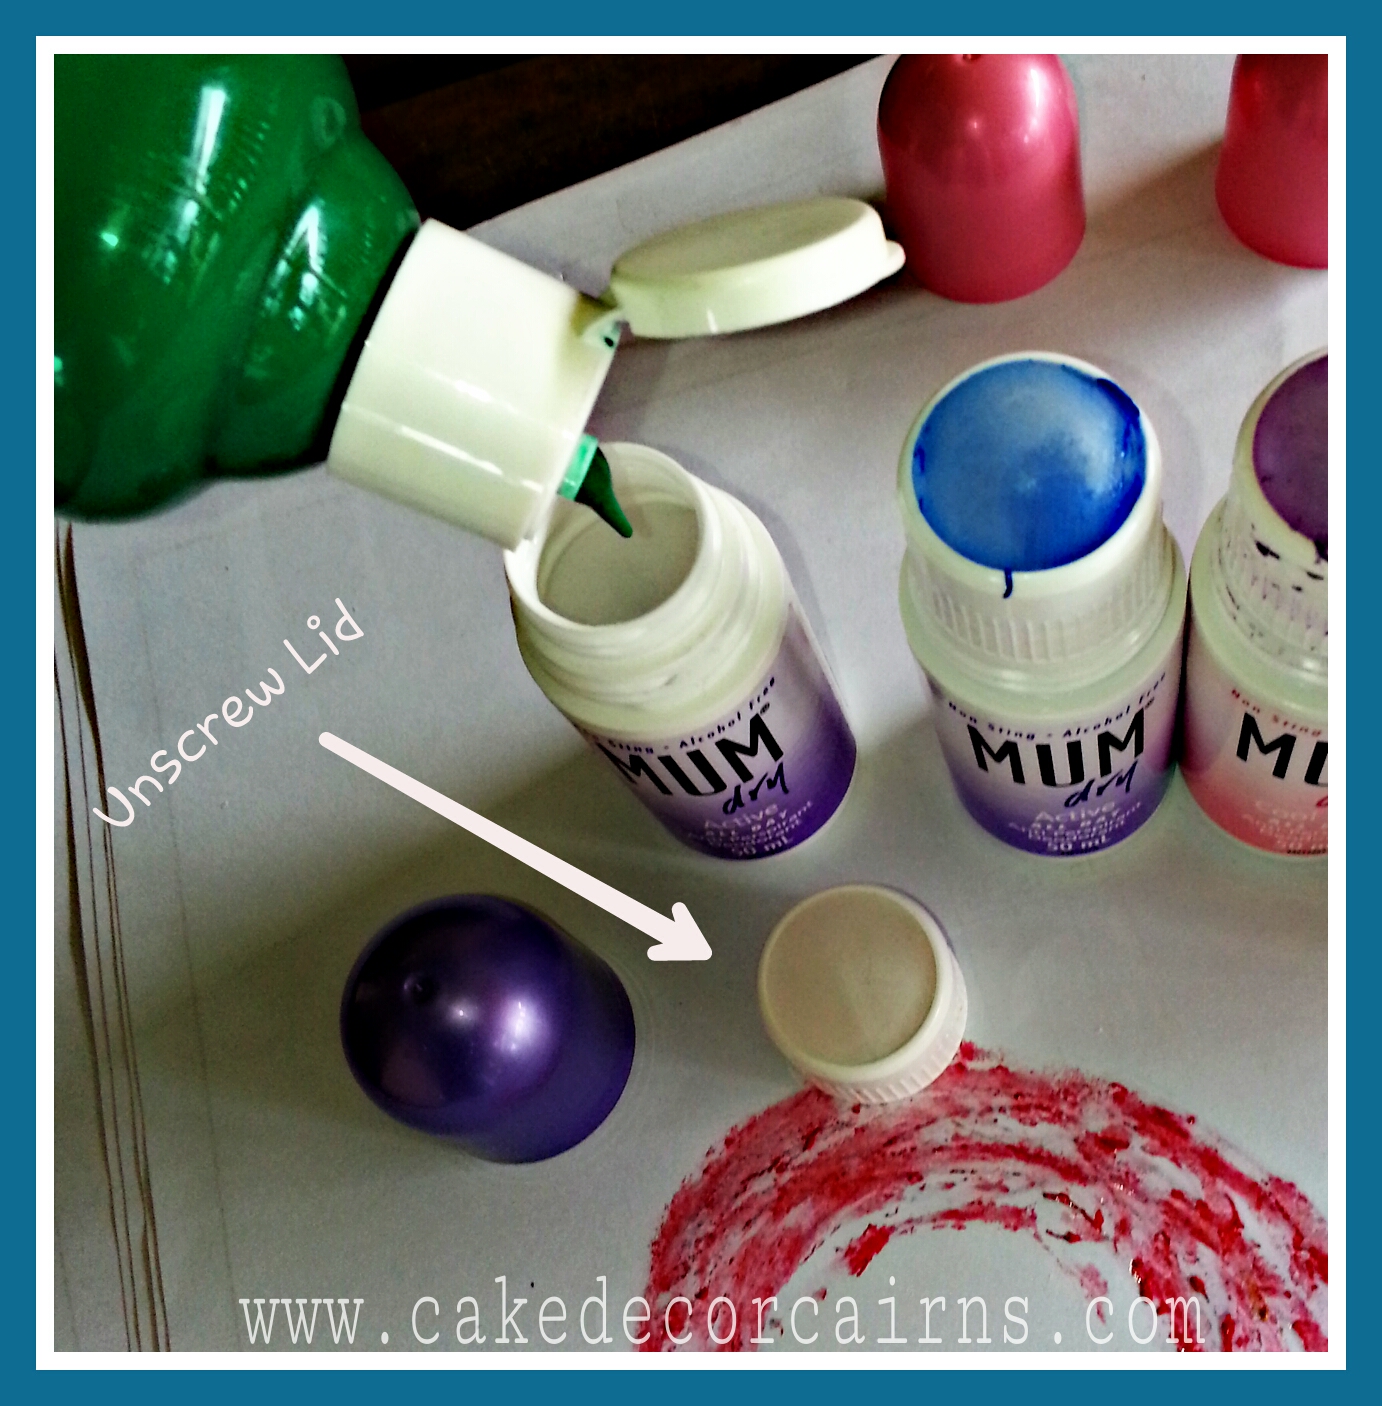 Recycle mum roll on bottles as a fun kids painting activity